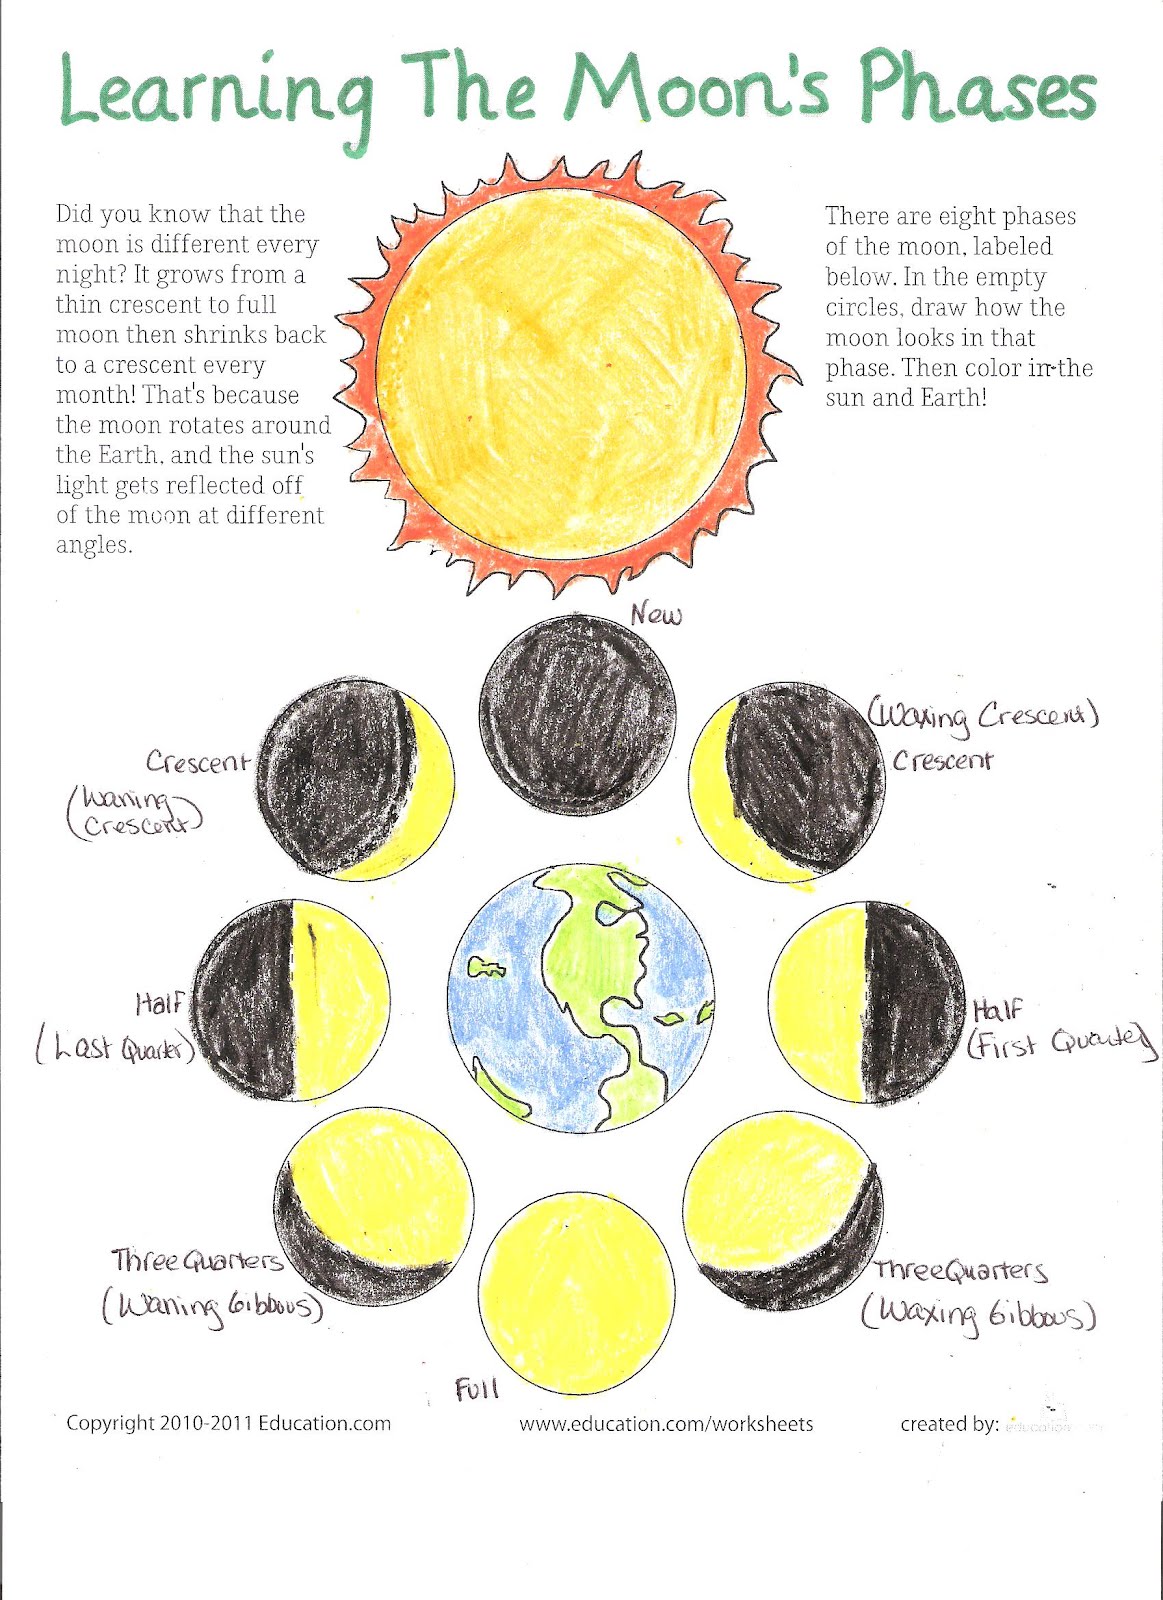 Superval Blog: Moon Phases - Fun with the kids